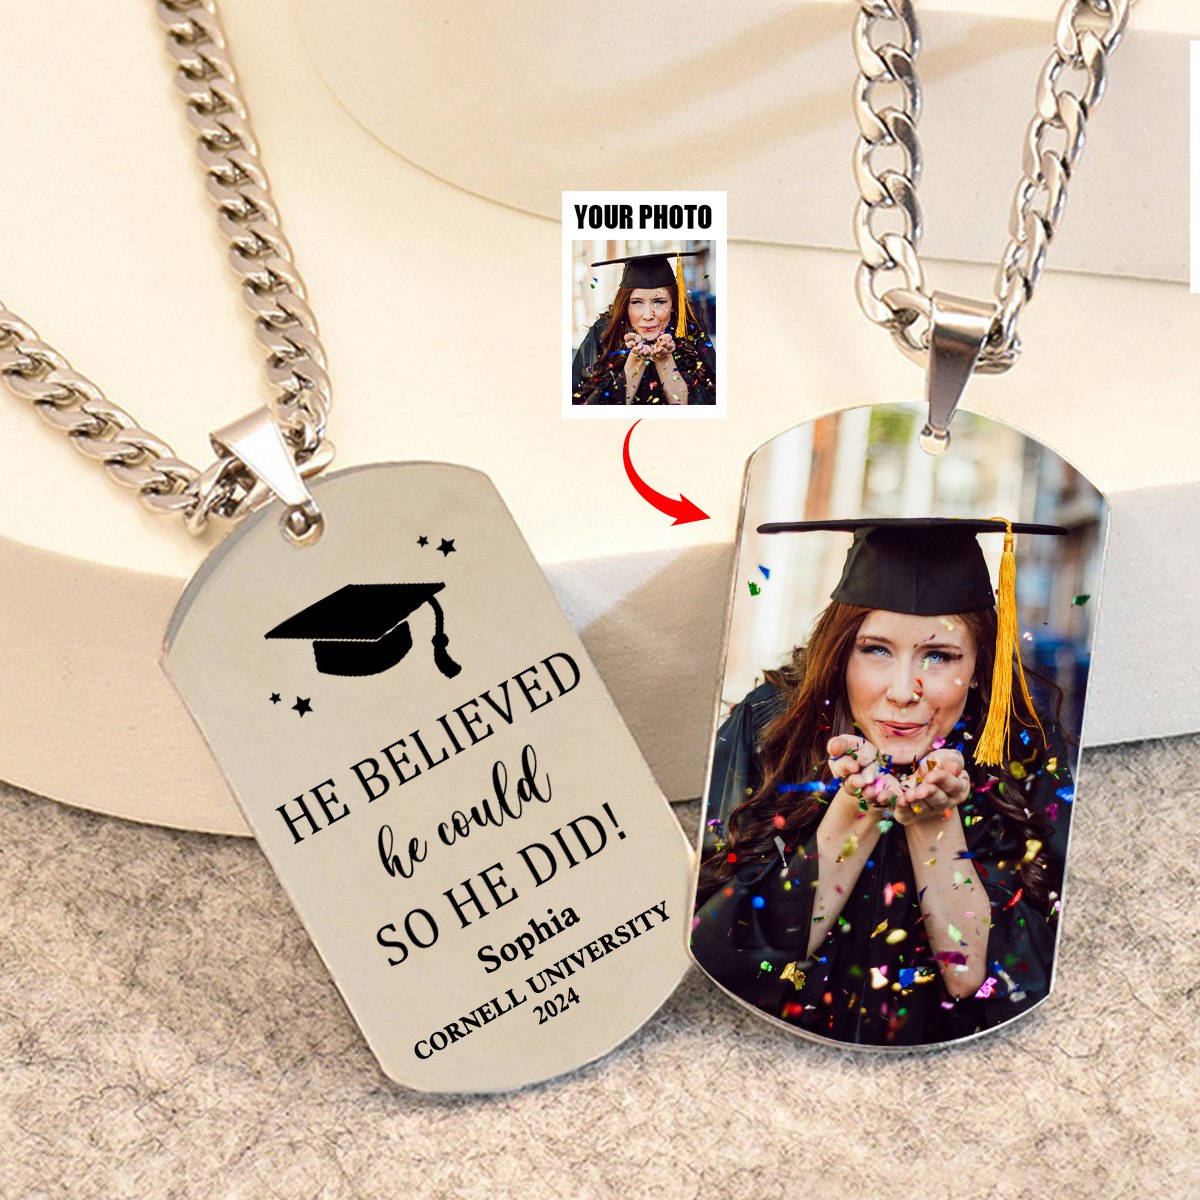 Graduation Gift I Wish You The Strength - Personalized Photo Necklace